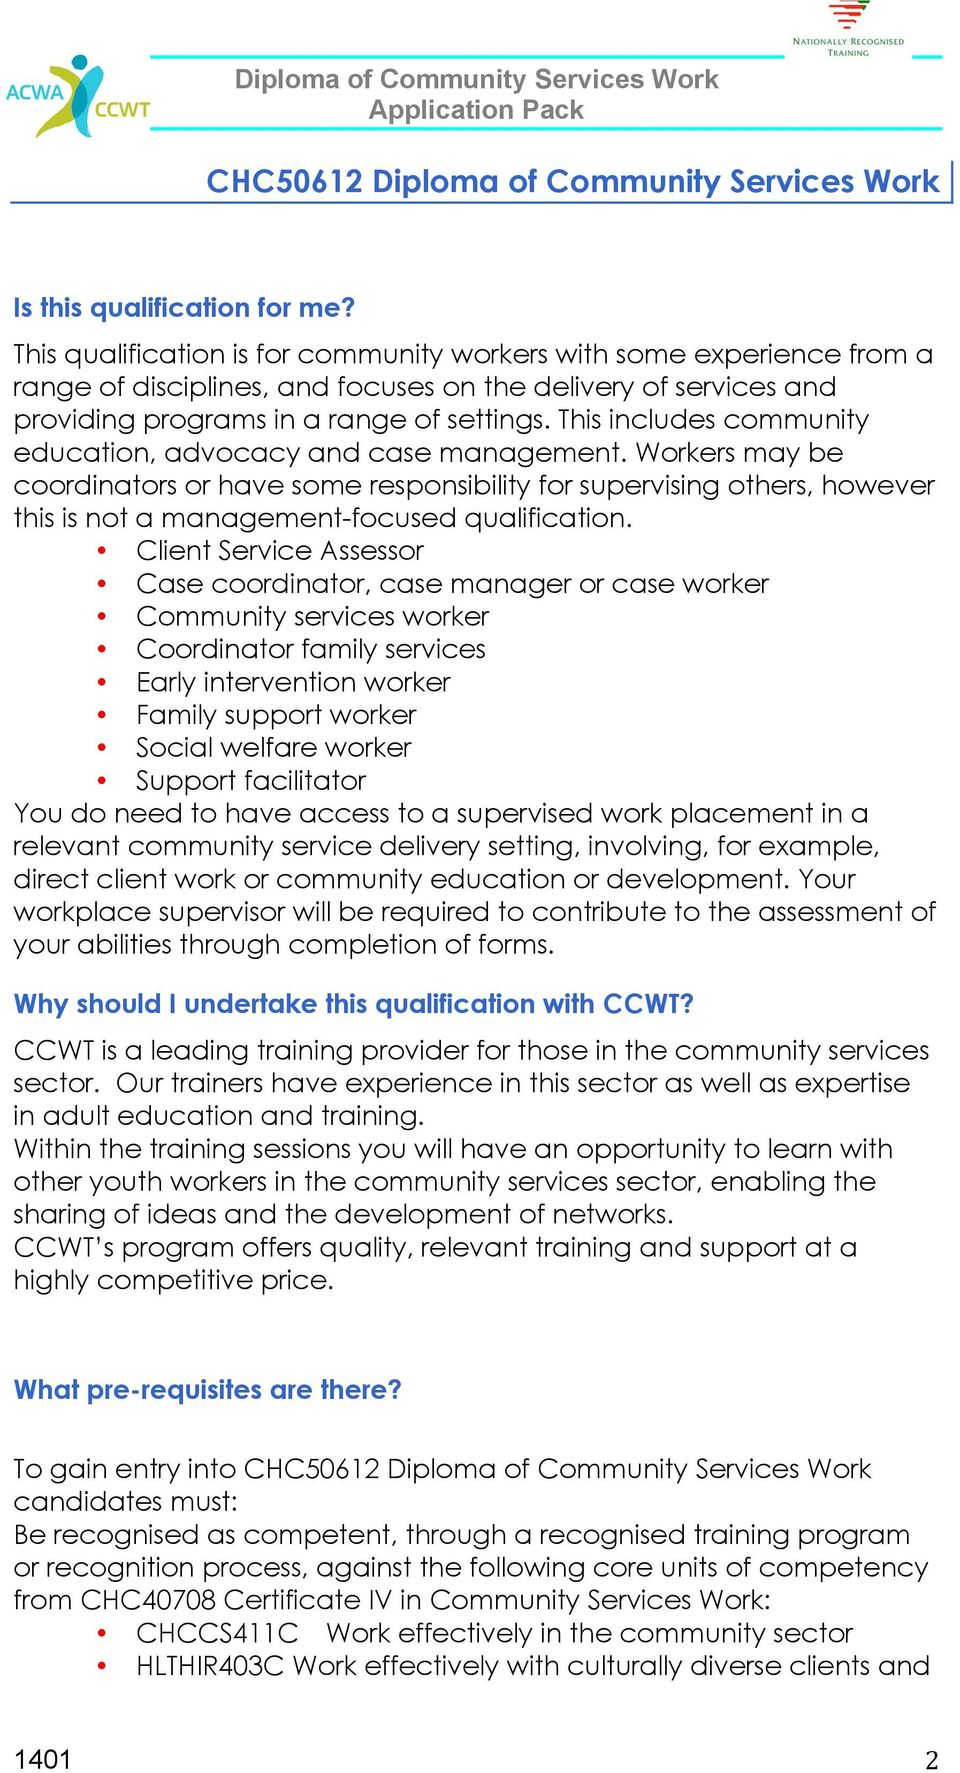 This includes community education, advocacy and case management. Workers may be coordinators or have some responsibility for supervising others, however this is not a management-focused qualification.